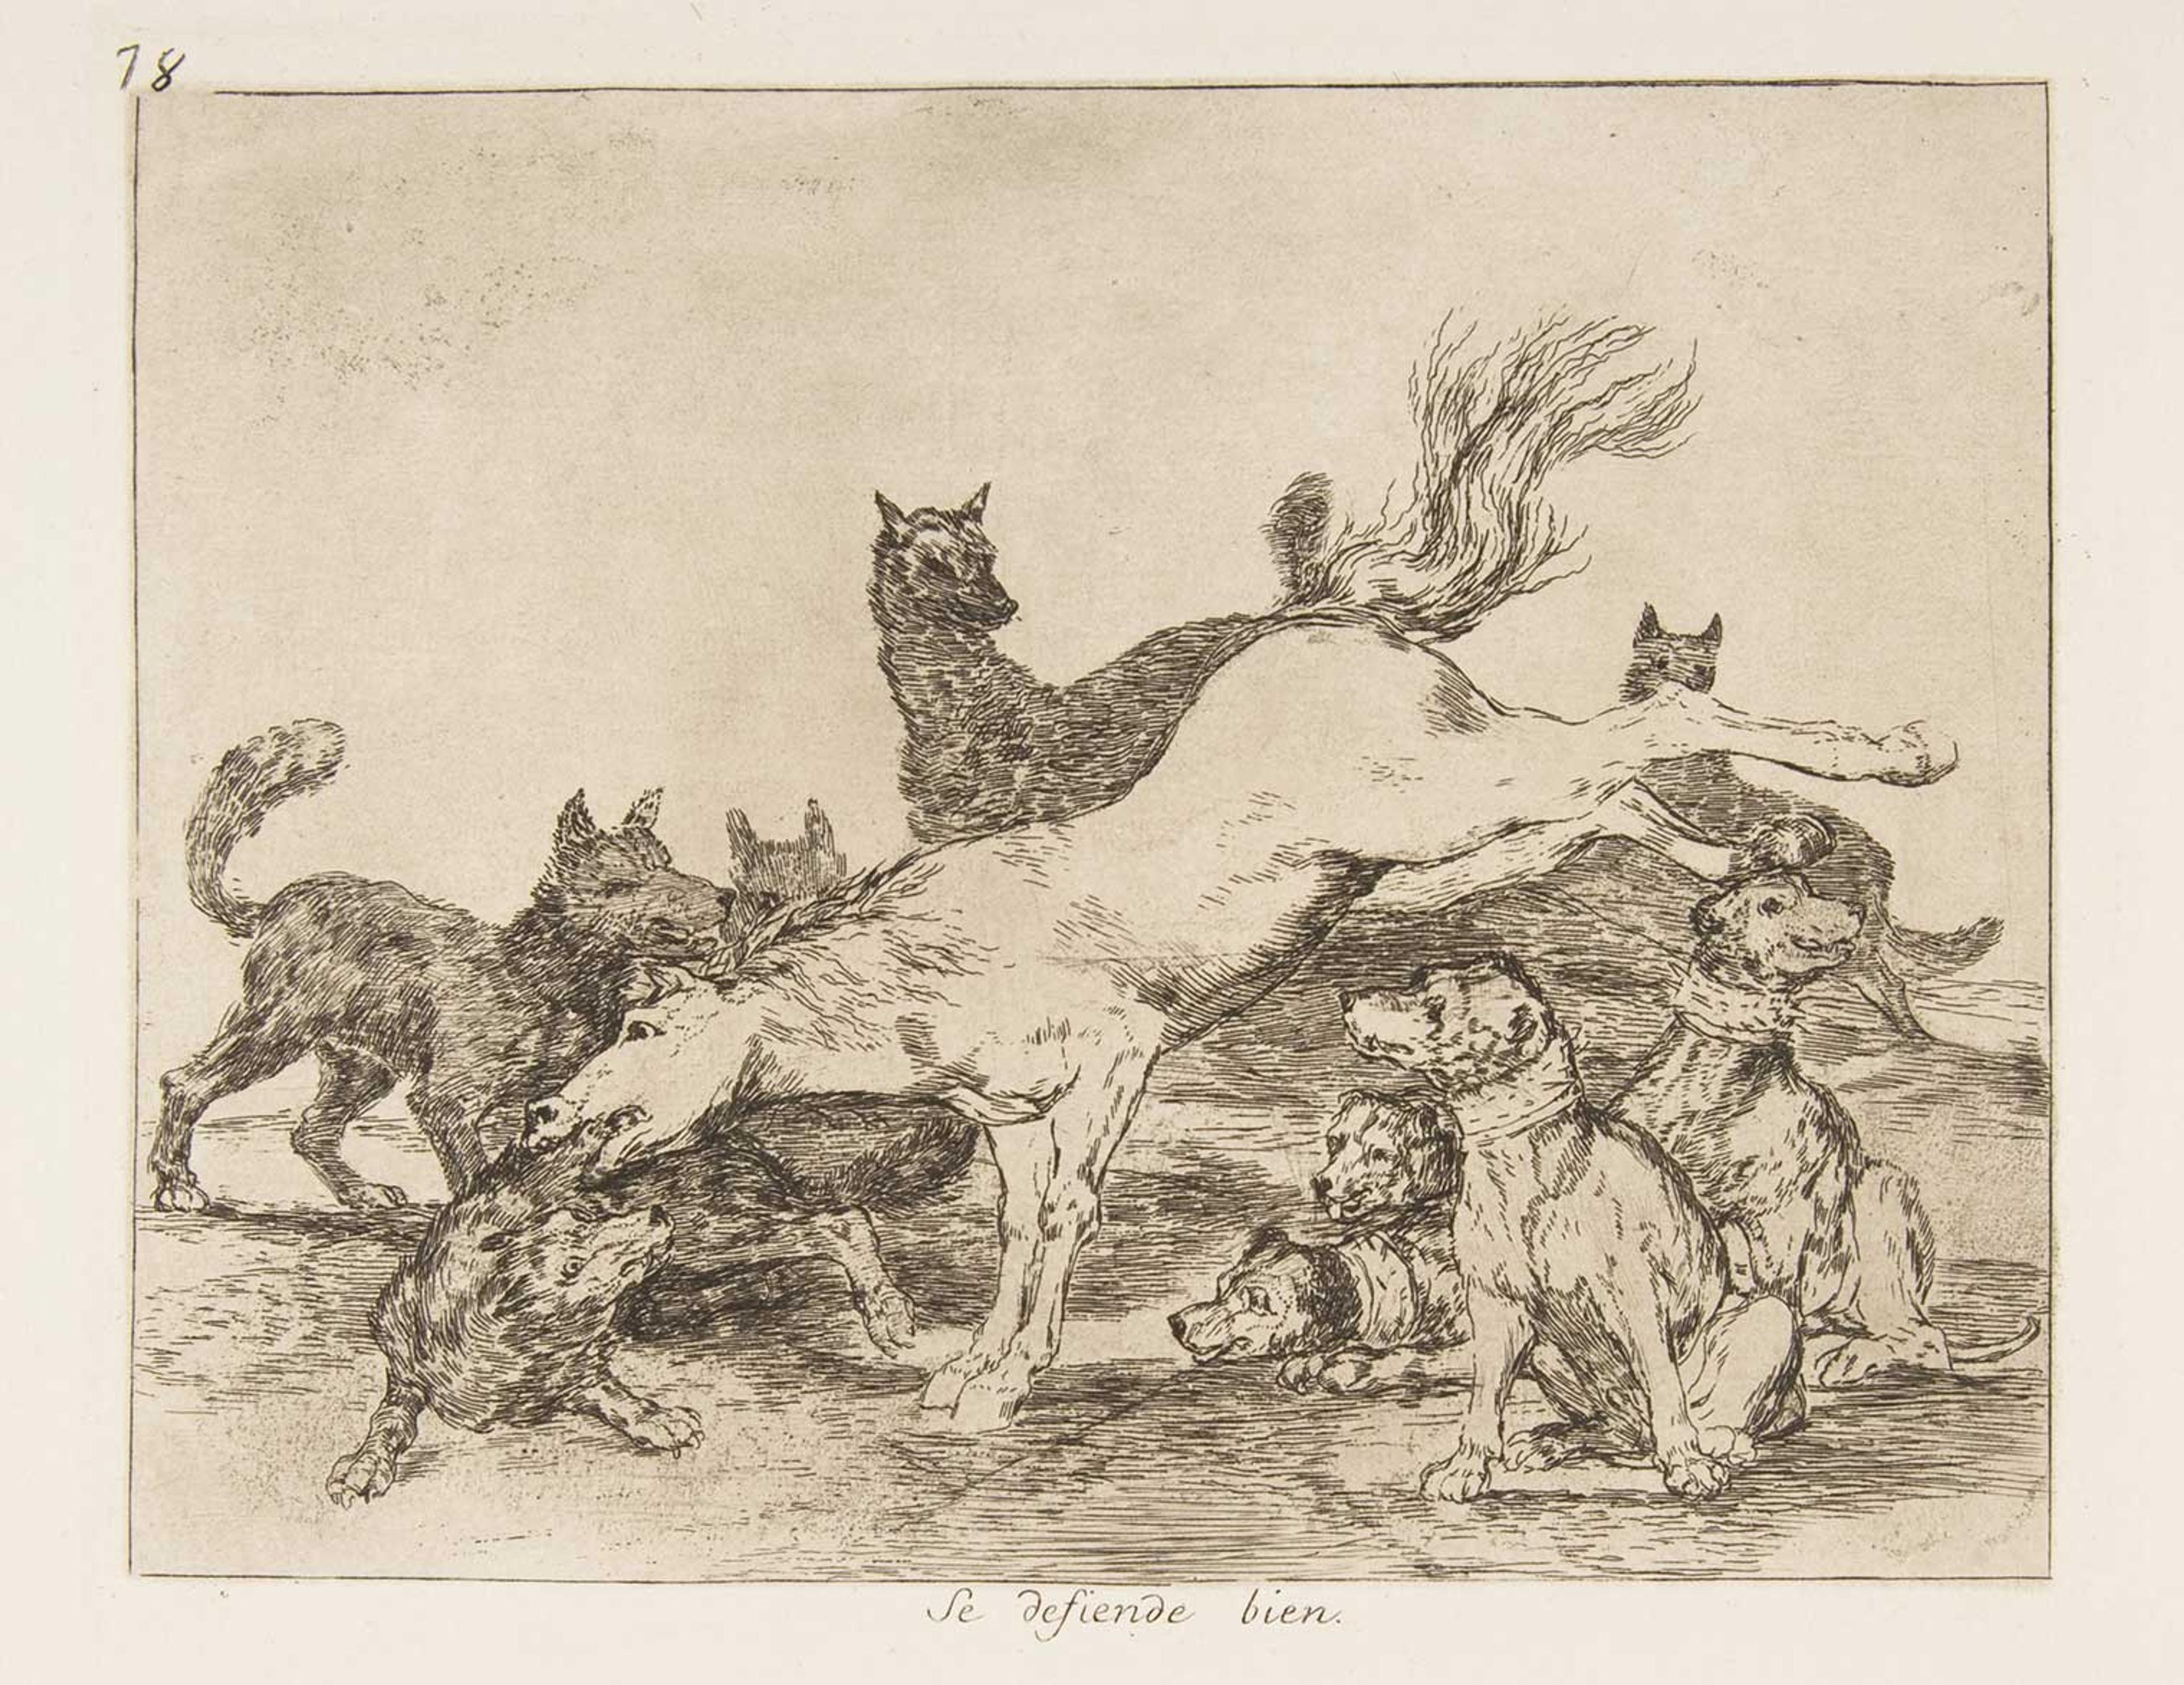 Drawing of a horse being attacked by wolves